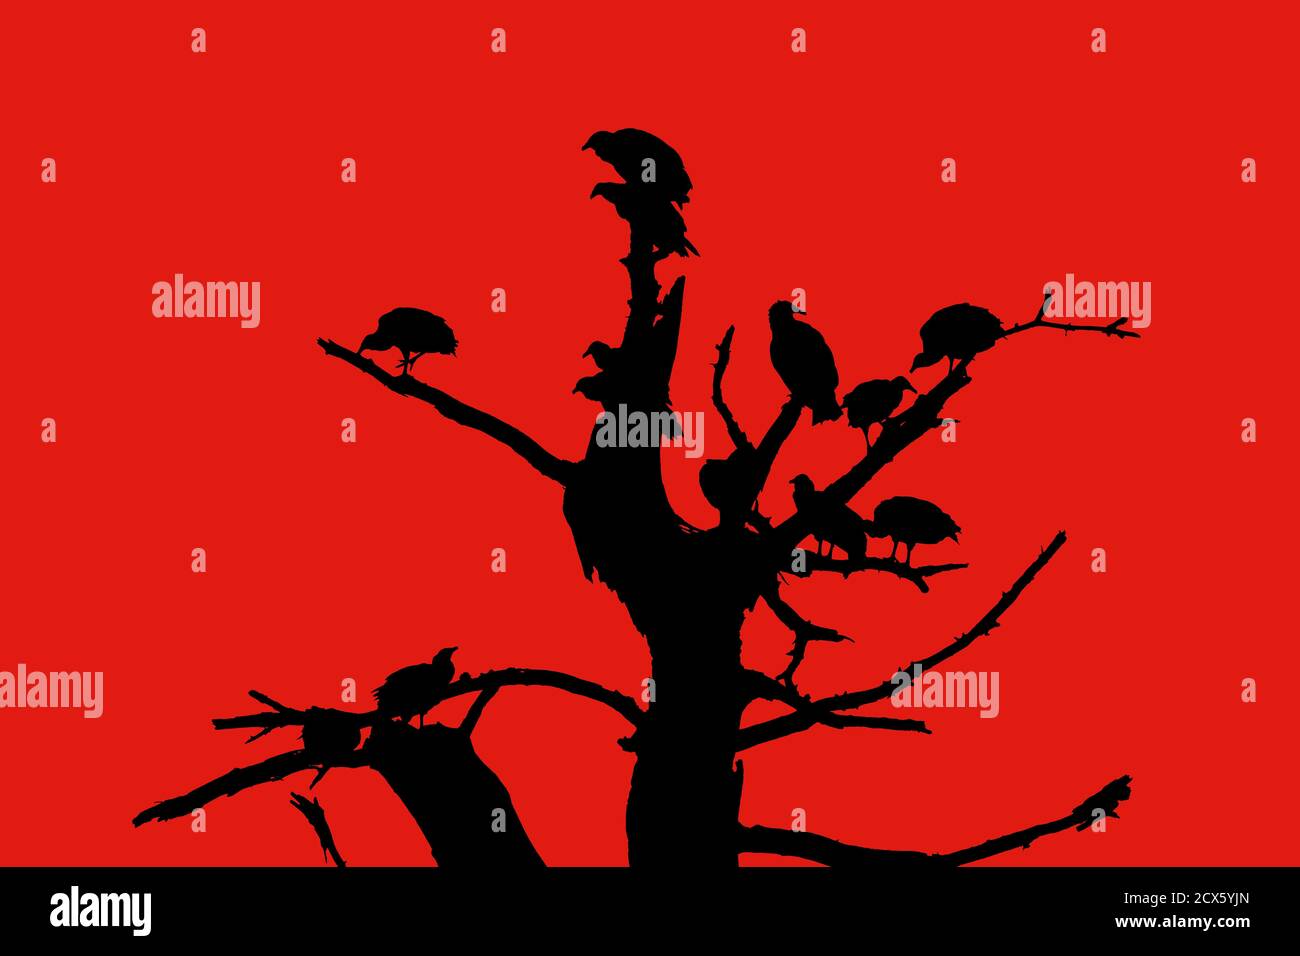 Silhouette of a dead tree full of vultures against a red background Stock Photo